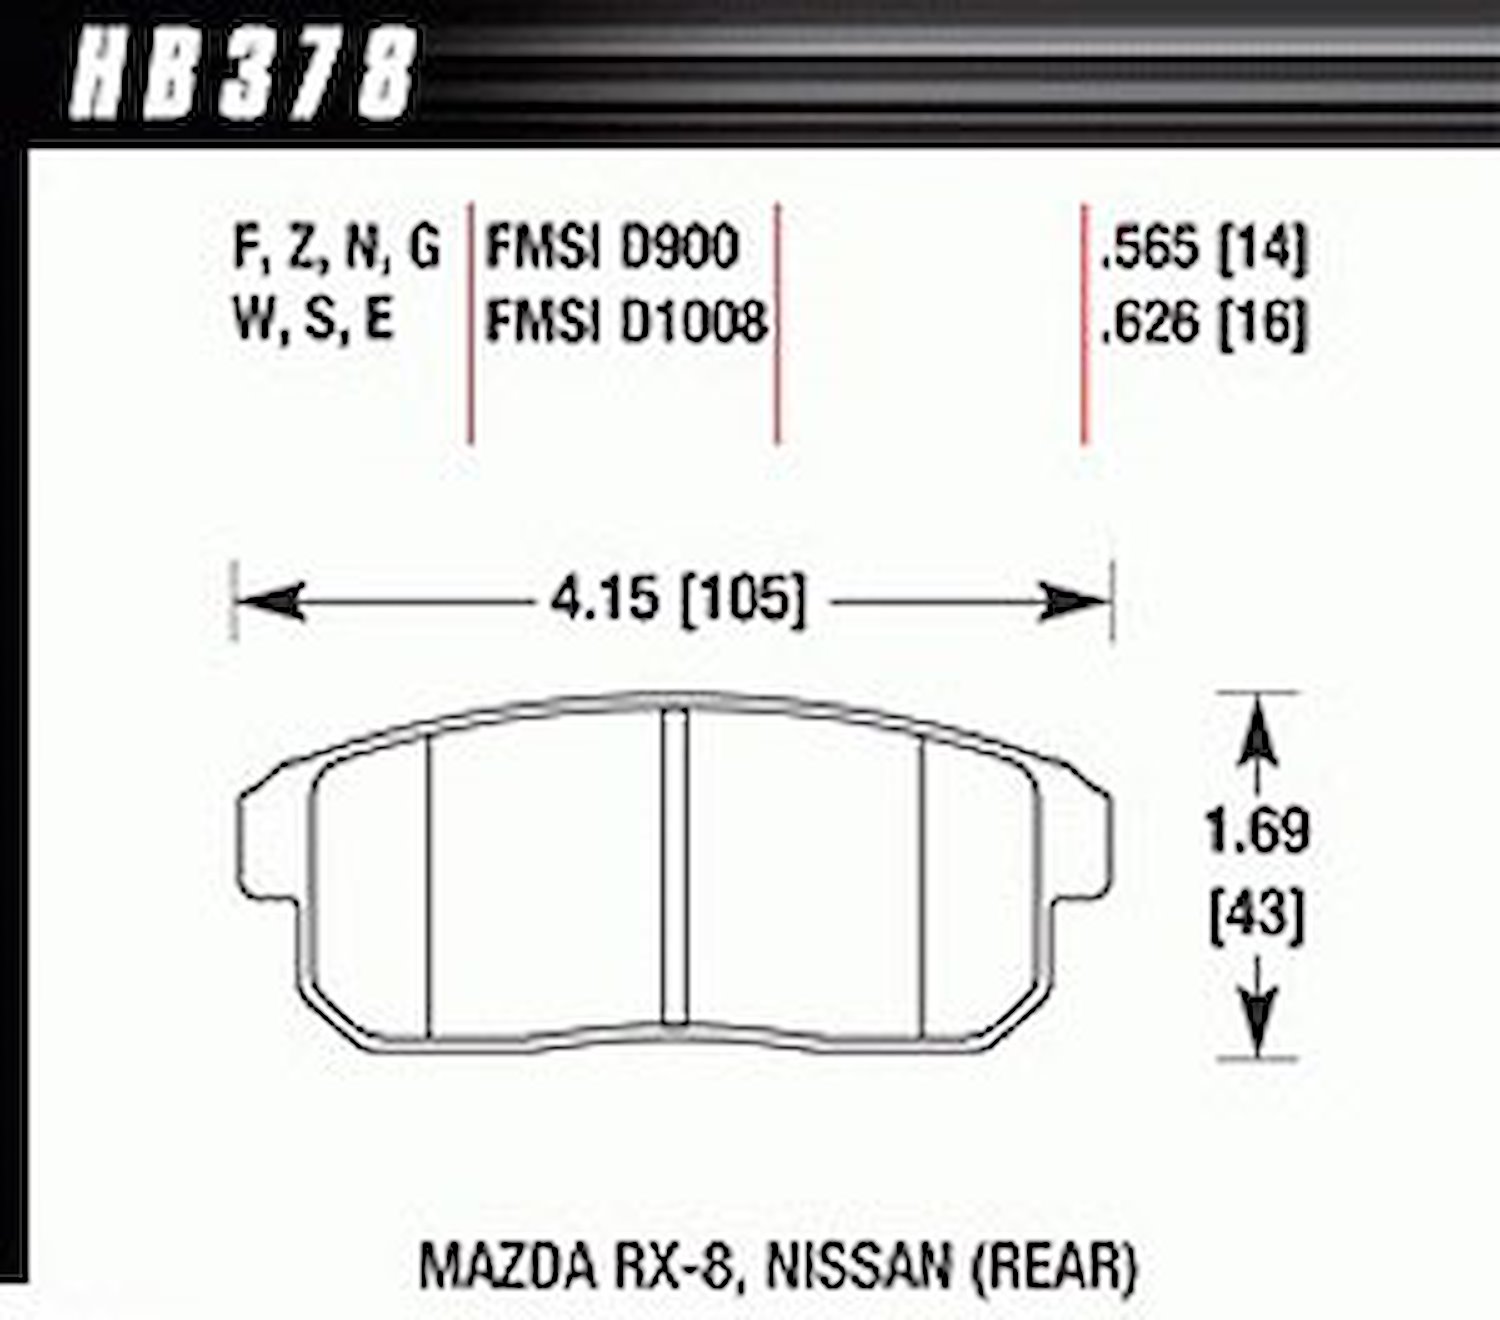 HT-10 PADS Mazda RX-8 For for Nissan Rear